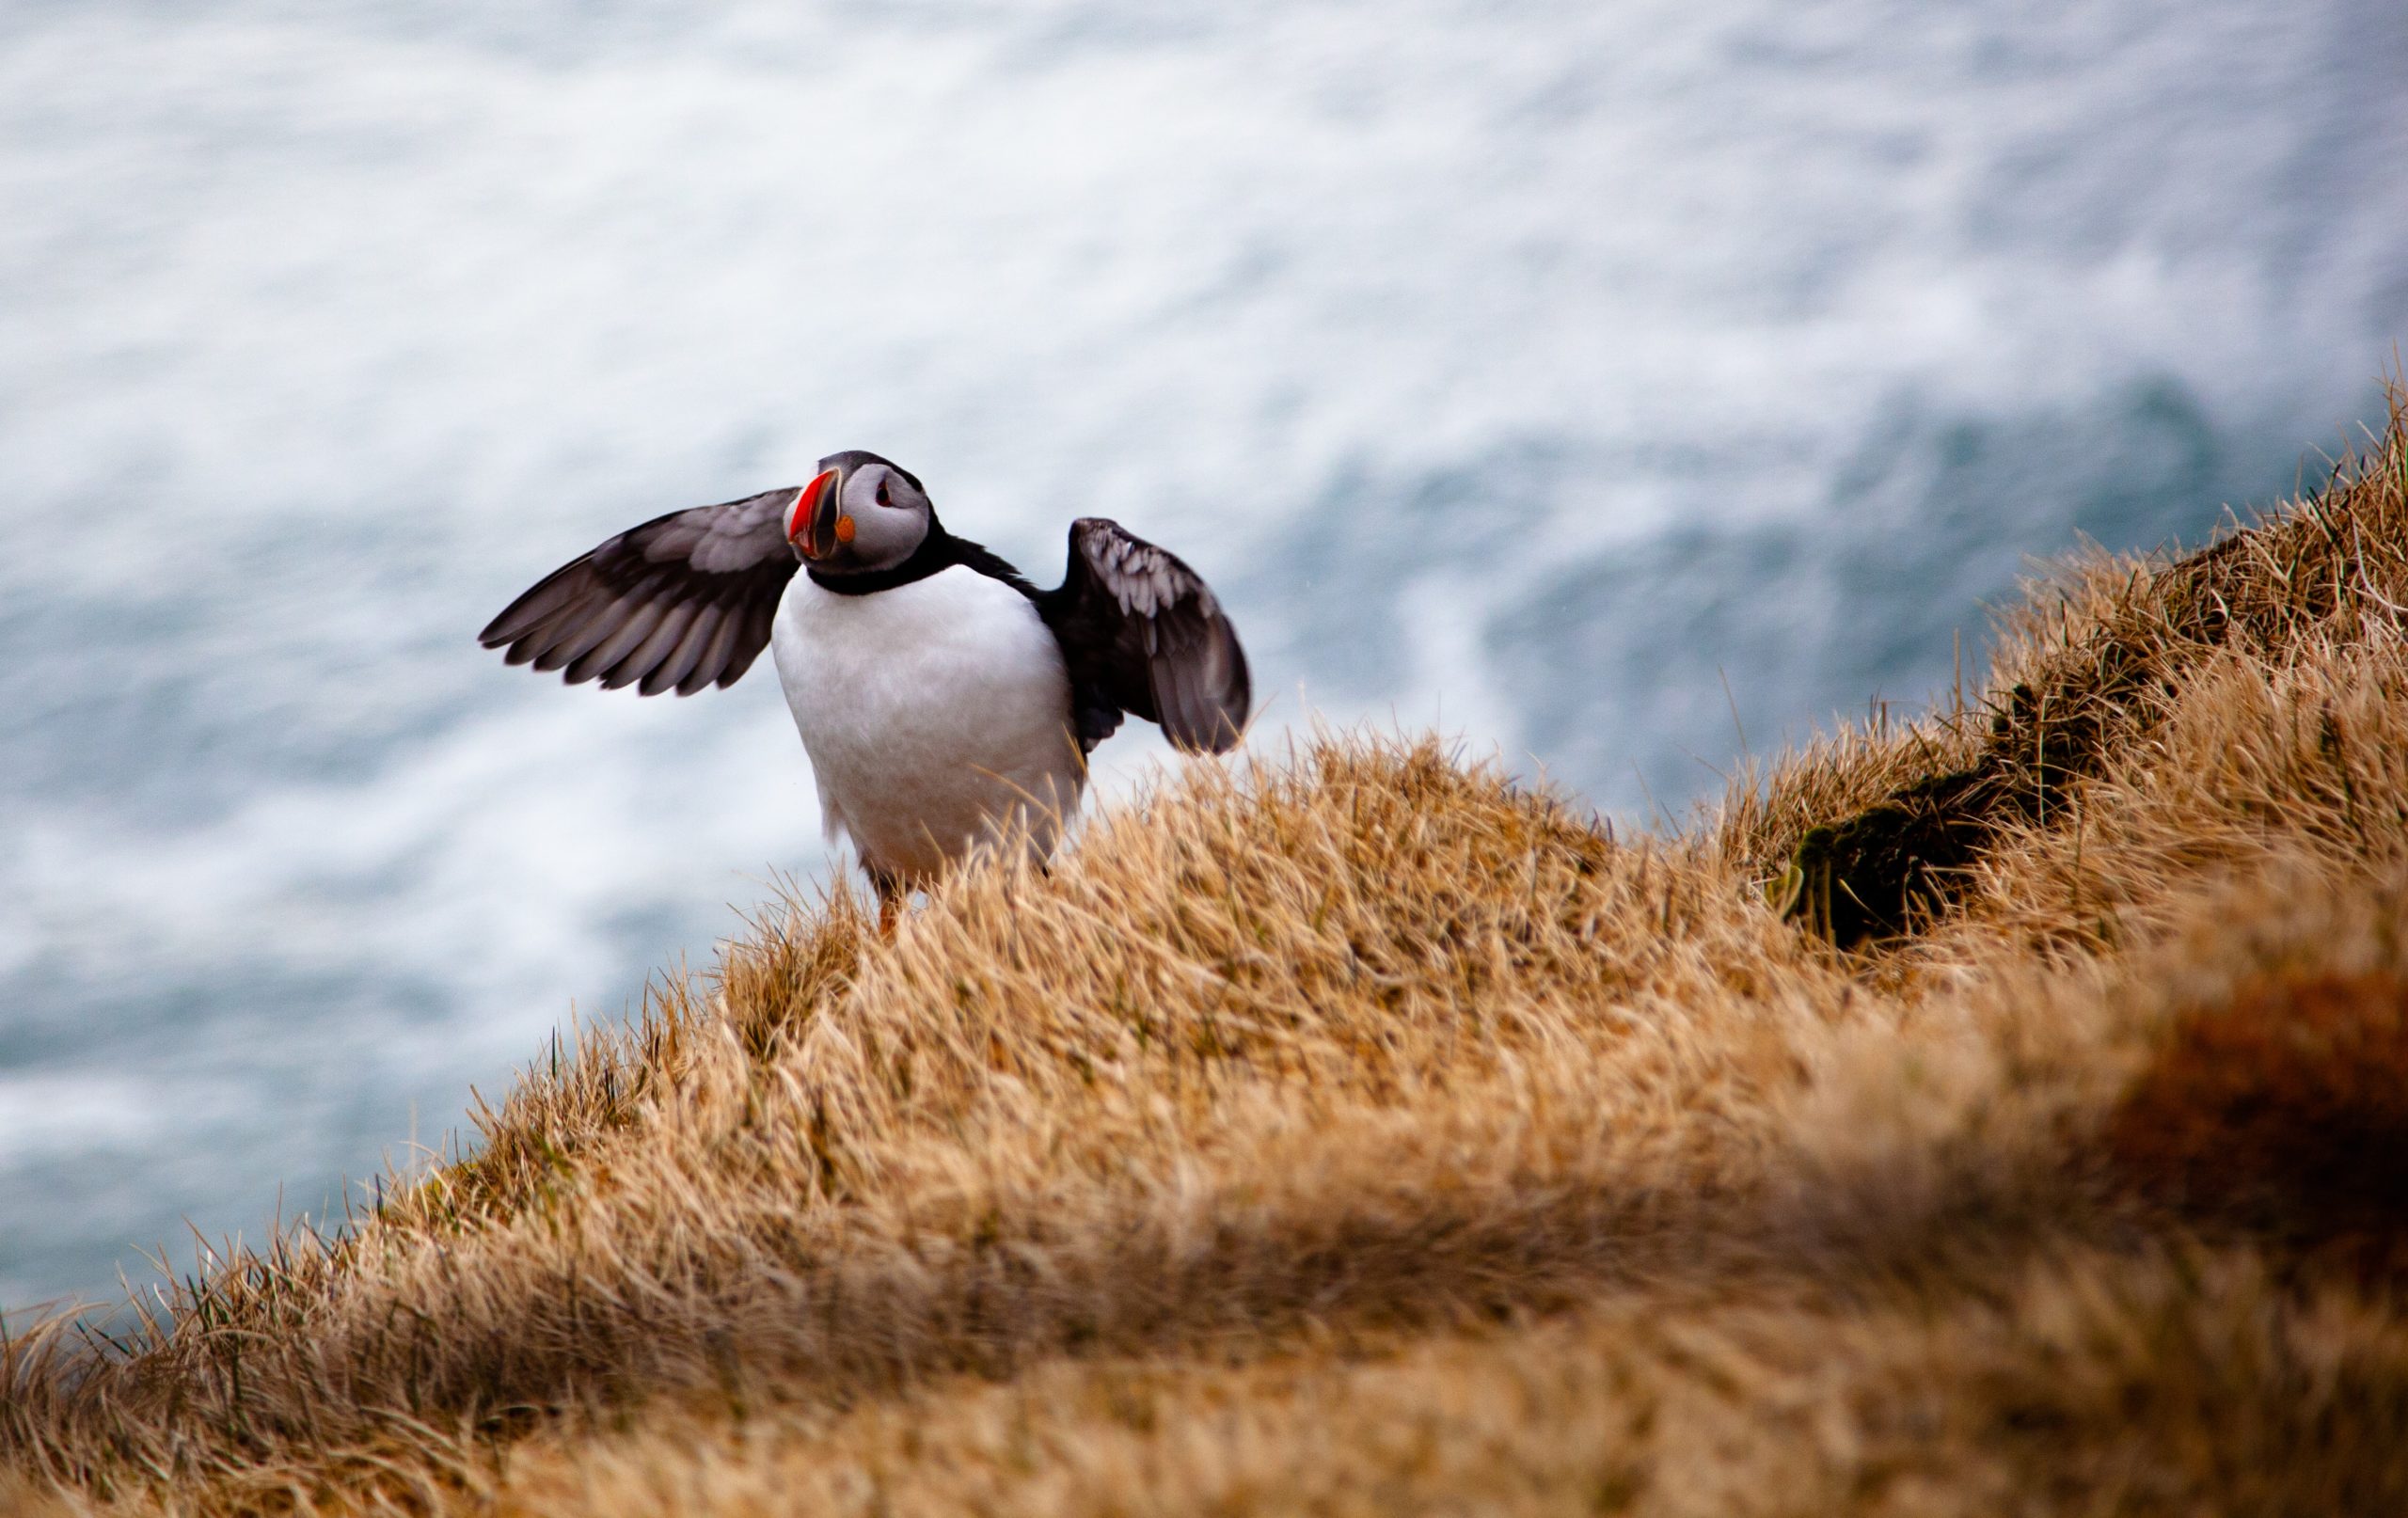 An Atlantic Puffin about to take flight